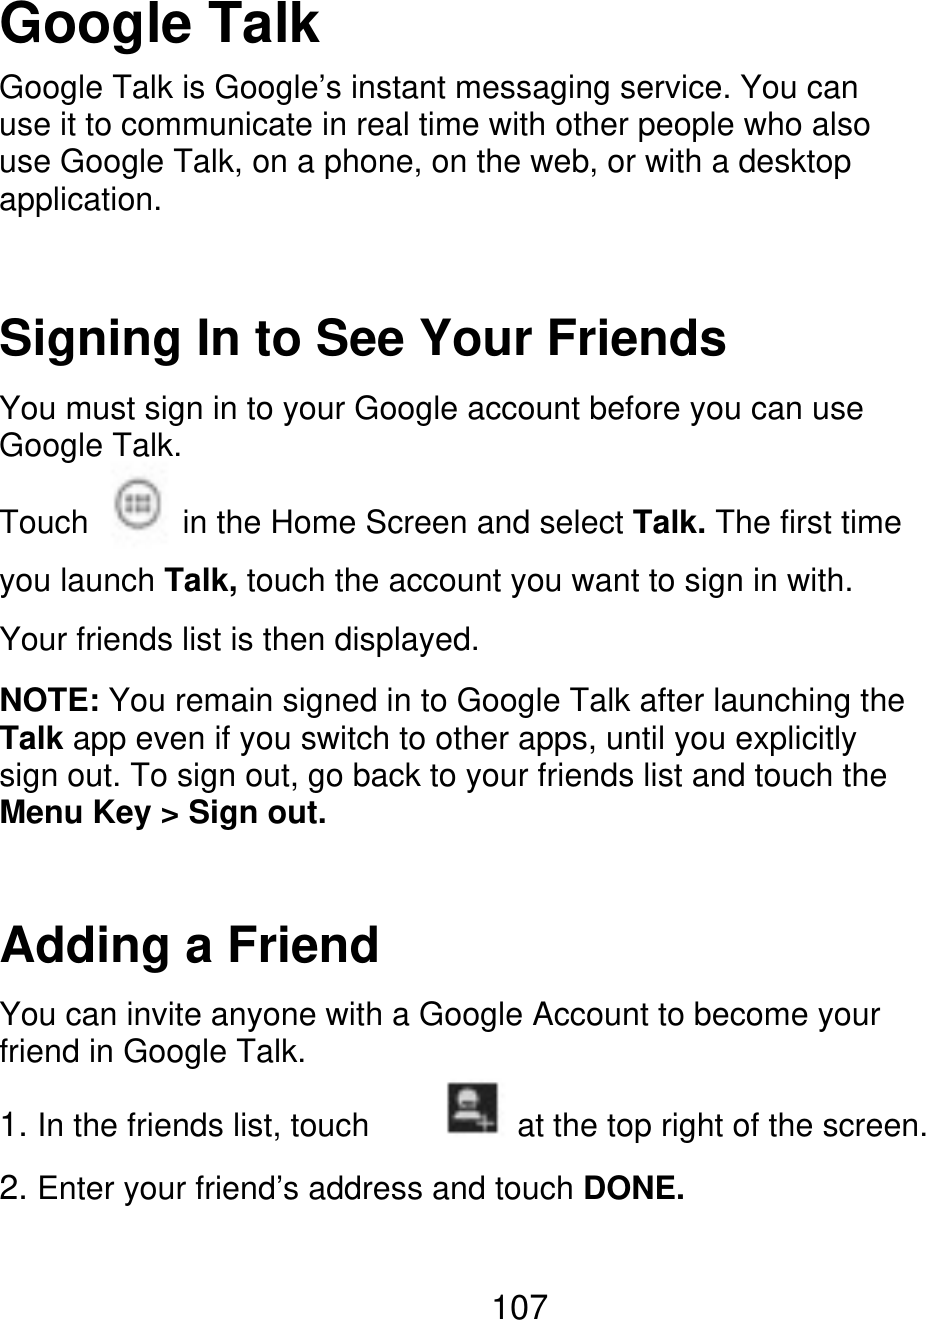 Google Talk Google Talk is Google’s instant messaging service. You can use it to communicate in real time with other people who also use Google Talk, on a phone, on the web, or with a desktop application. Signing In to See Your Friends You must sign in to your Google account before you can use Google Talk. Touch in the Home Screen and select Talk. The first time you launch Talk, touch the account you want to sign in with. Your friends list is then displayed. NOTE: You remain signed in to Google Talk after launching the Talk app even if you switch to other apps, until you explicitly sign out. To sign out, go back to your friends list and touch the Menu Key &gt; Sign out. Adding a Friend You can invite anyone with a Google Account to become your friend in Google Talk. 1. In the friends list, touch at the top right of the screen. 2. Enter your friend’s address and touch DONE. 107 